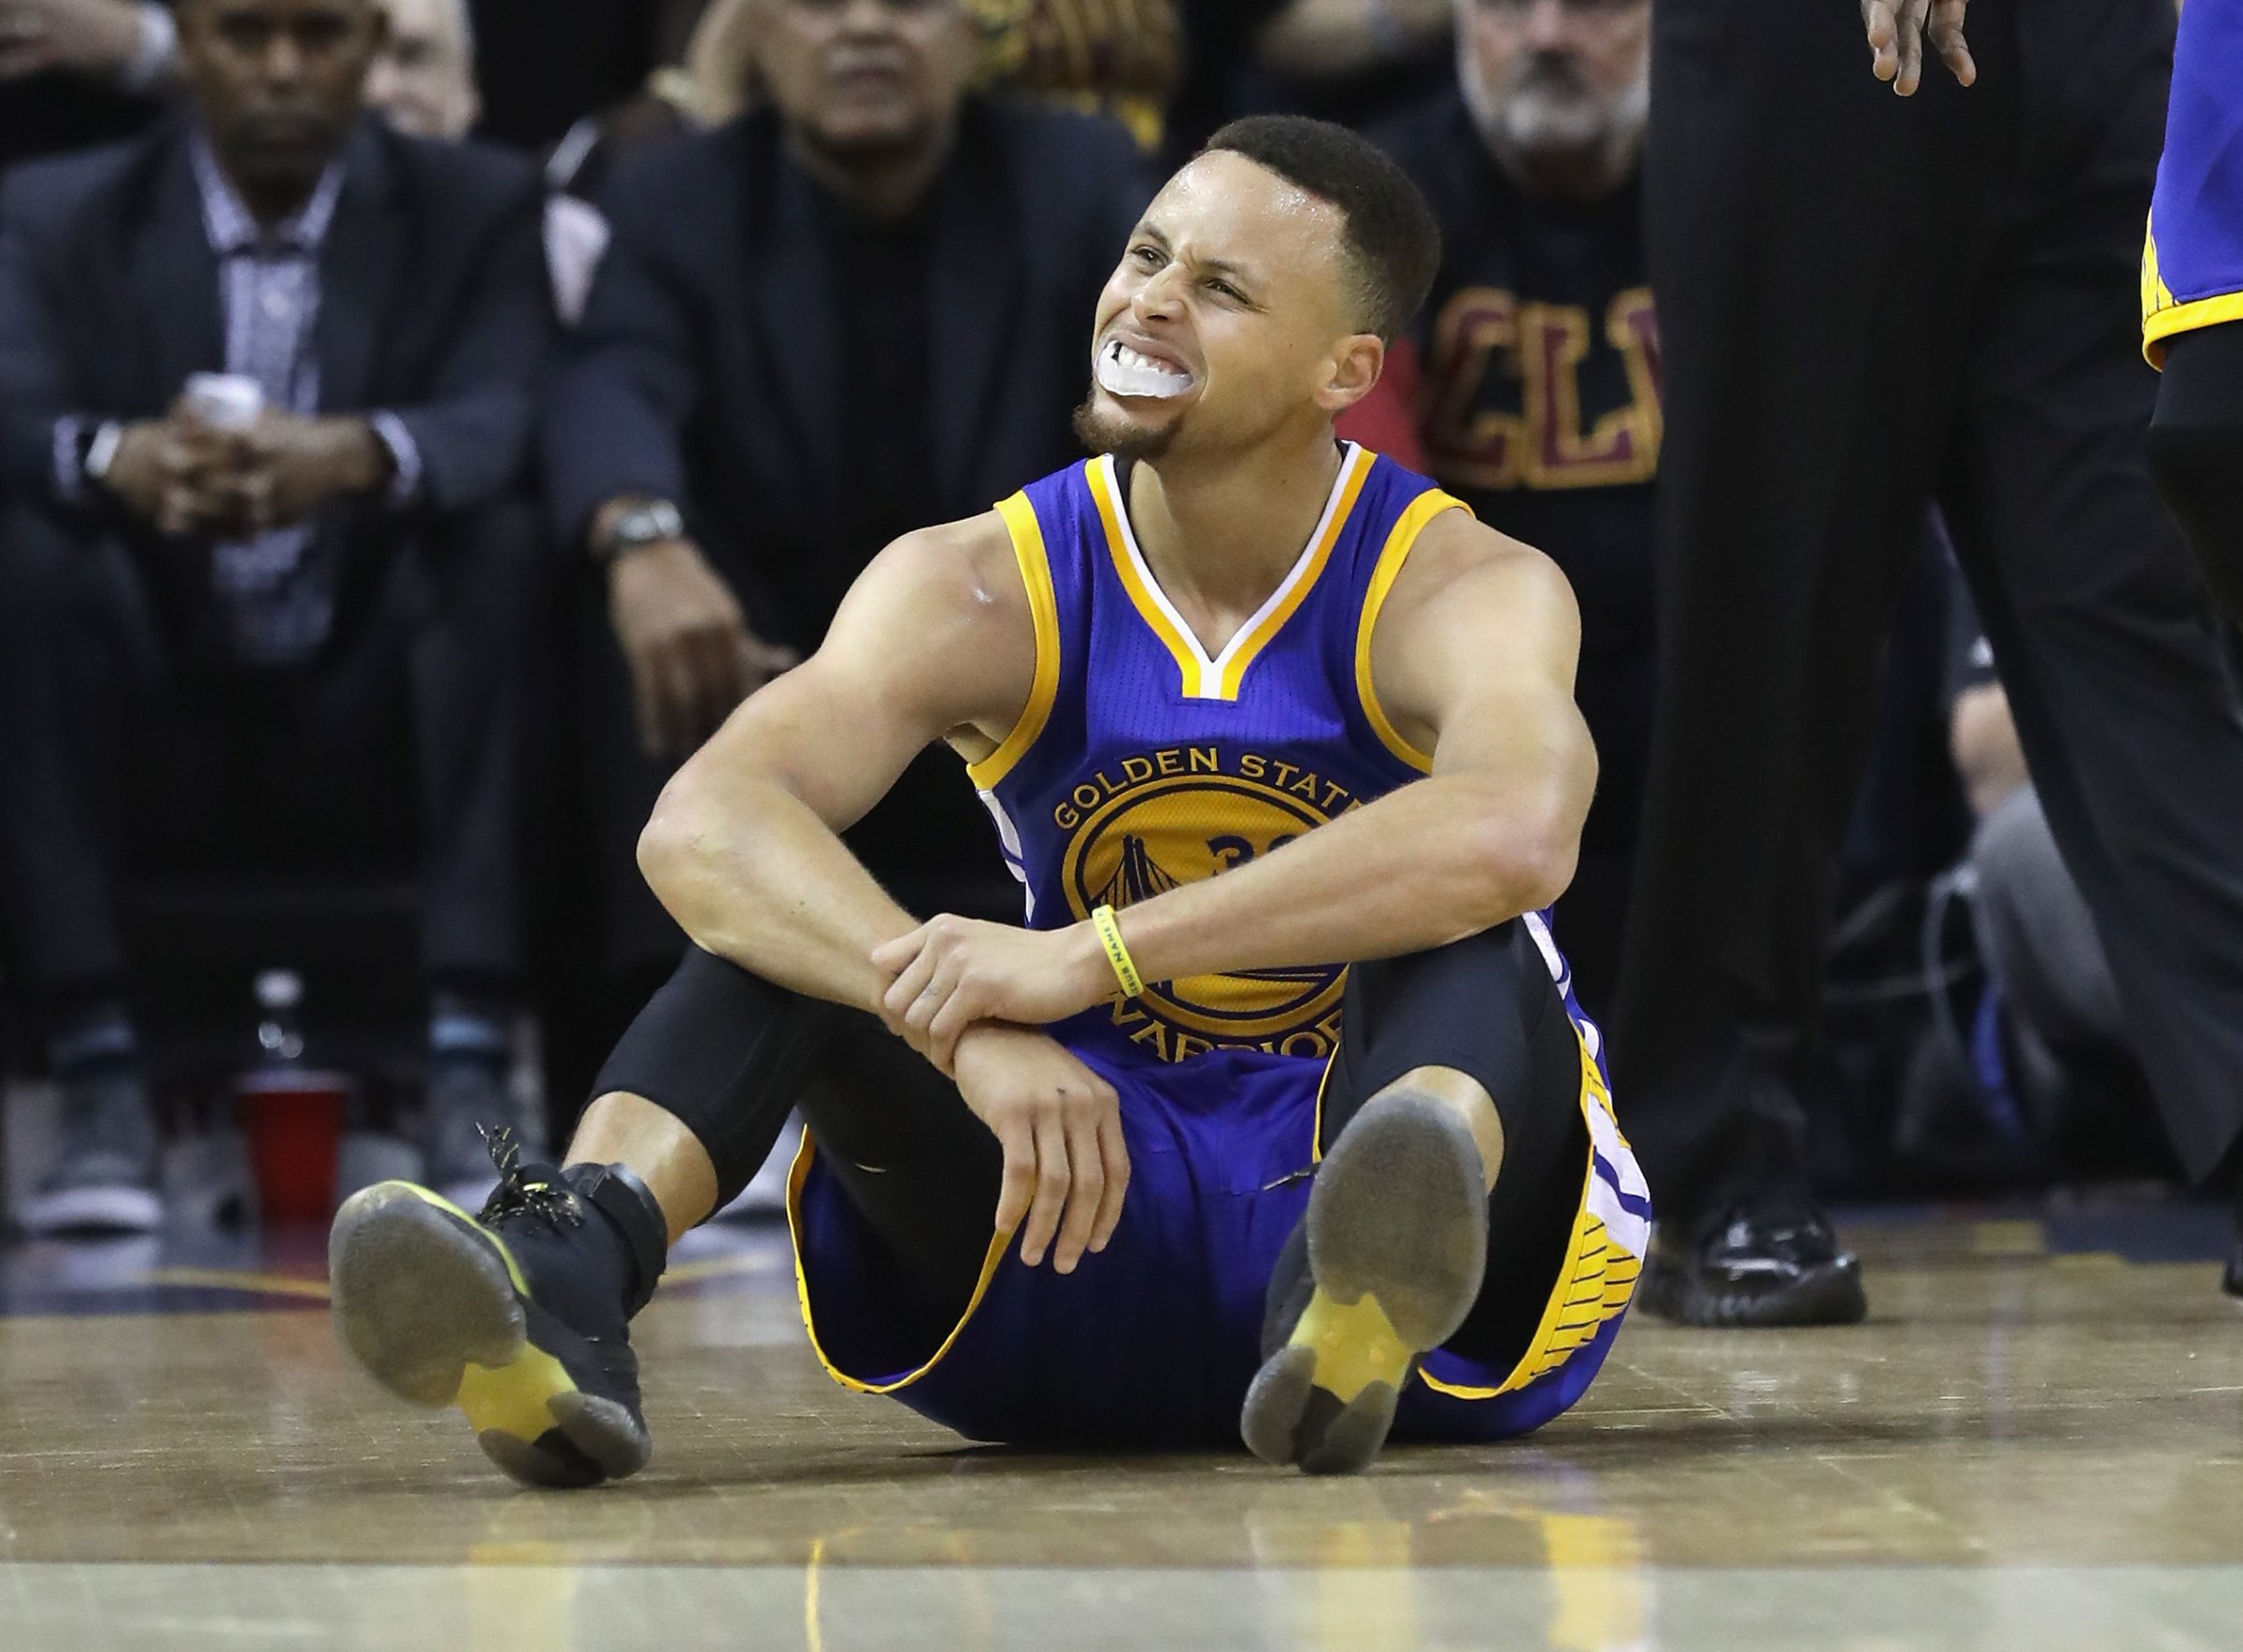 Stephen Curry of the Golden State Warriors reacts after a call in the first half against the Cleveland Cavaliers in Game 6 of the 2016 NBA Finals at Quicken Loans Arena on June 16, 2016 in Cleveland, Ohio.